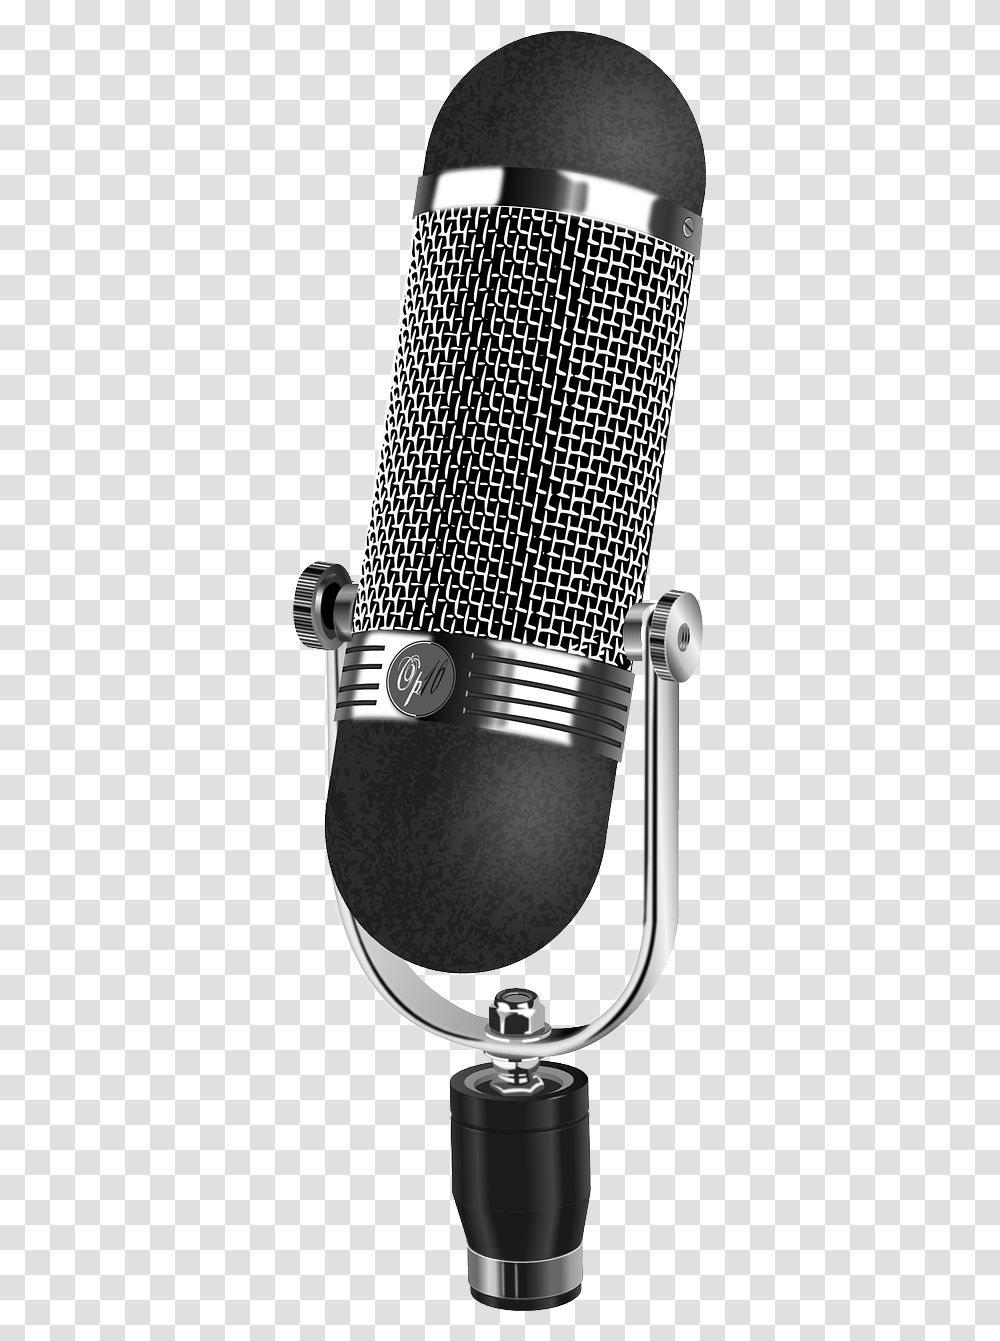 Microfono Transparente, Electrical Device, Microphone Transparent Png